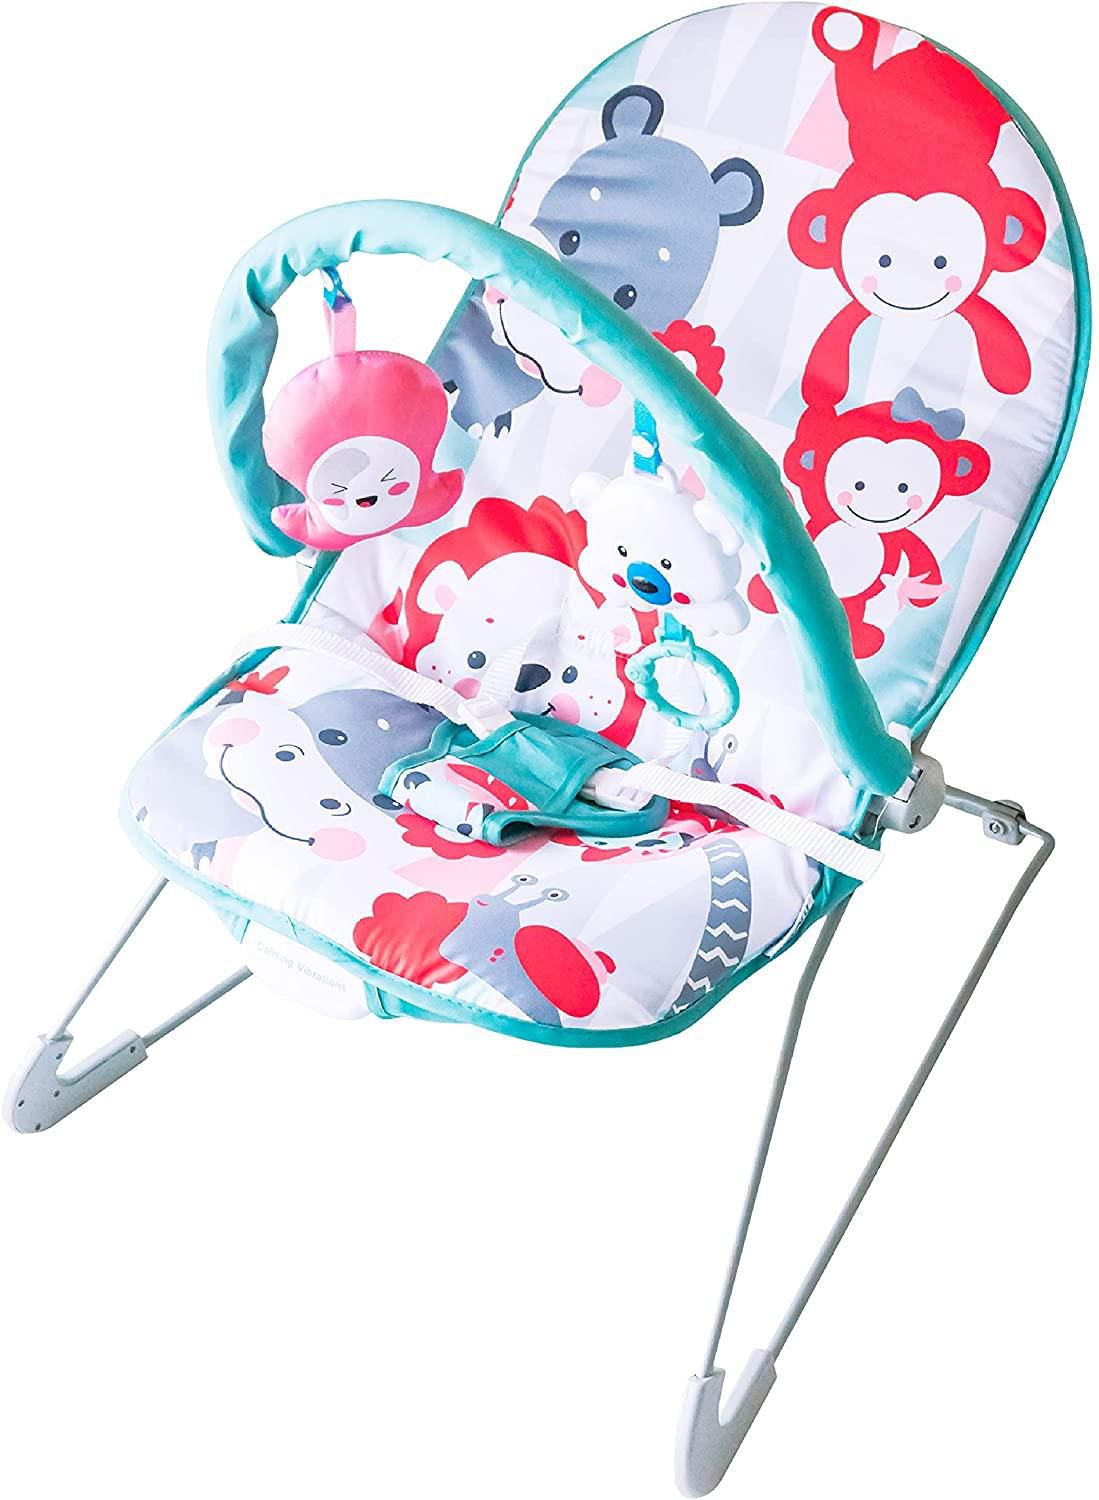 MOON HOP-HOP Baby Bouncer Portable Soothing Seat with Vibration, 3 months above - Pink Color